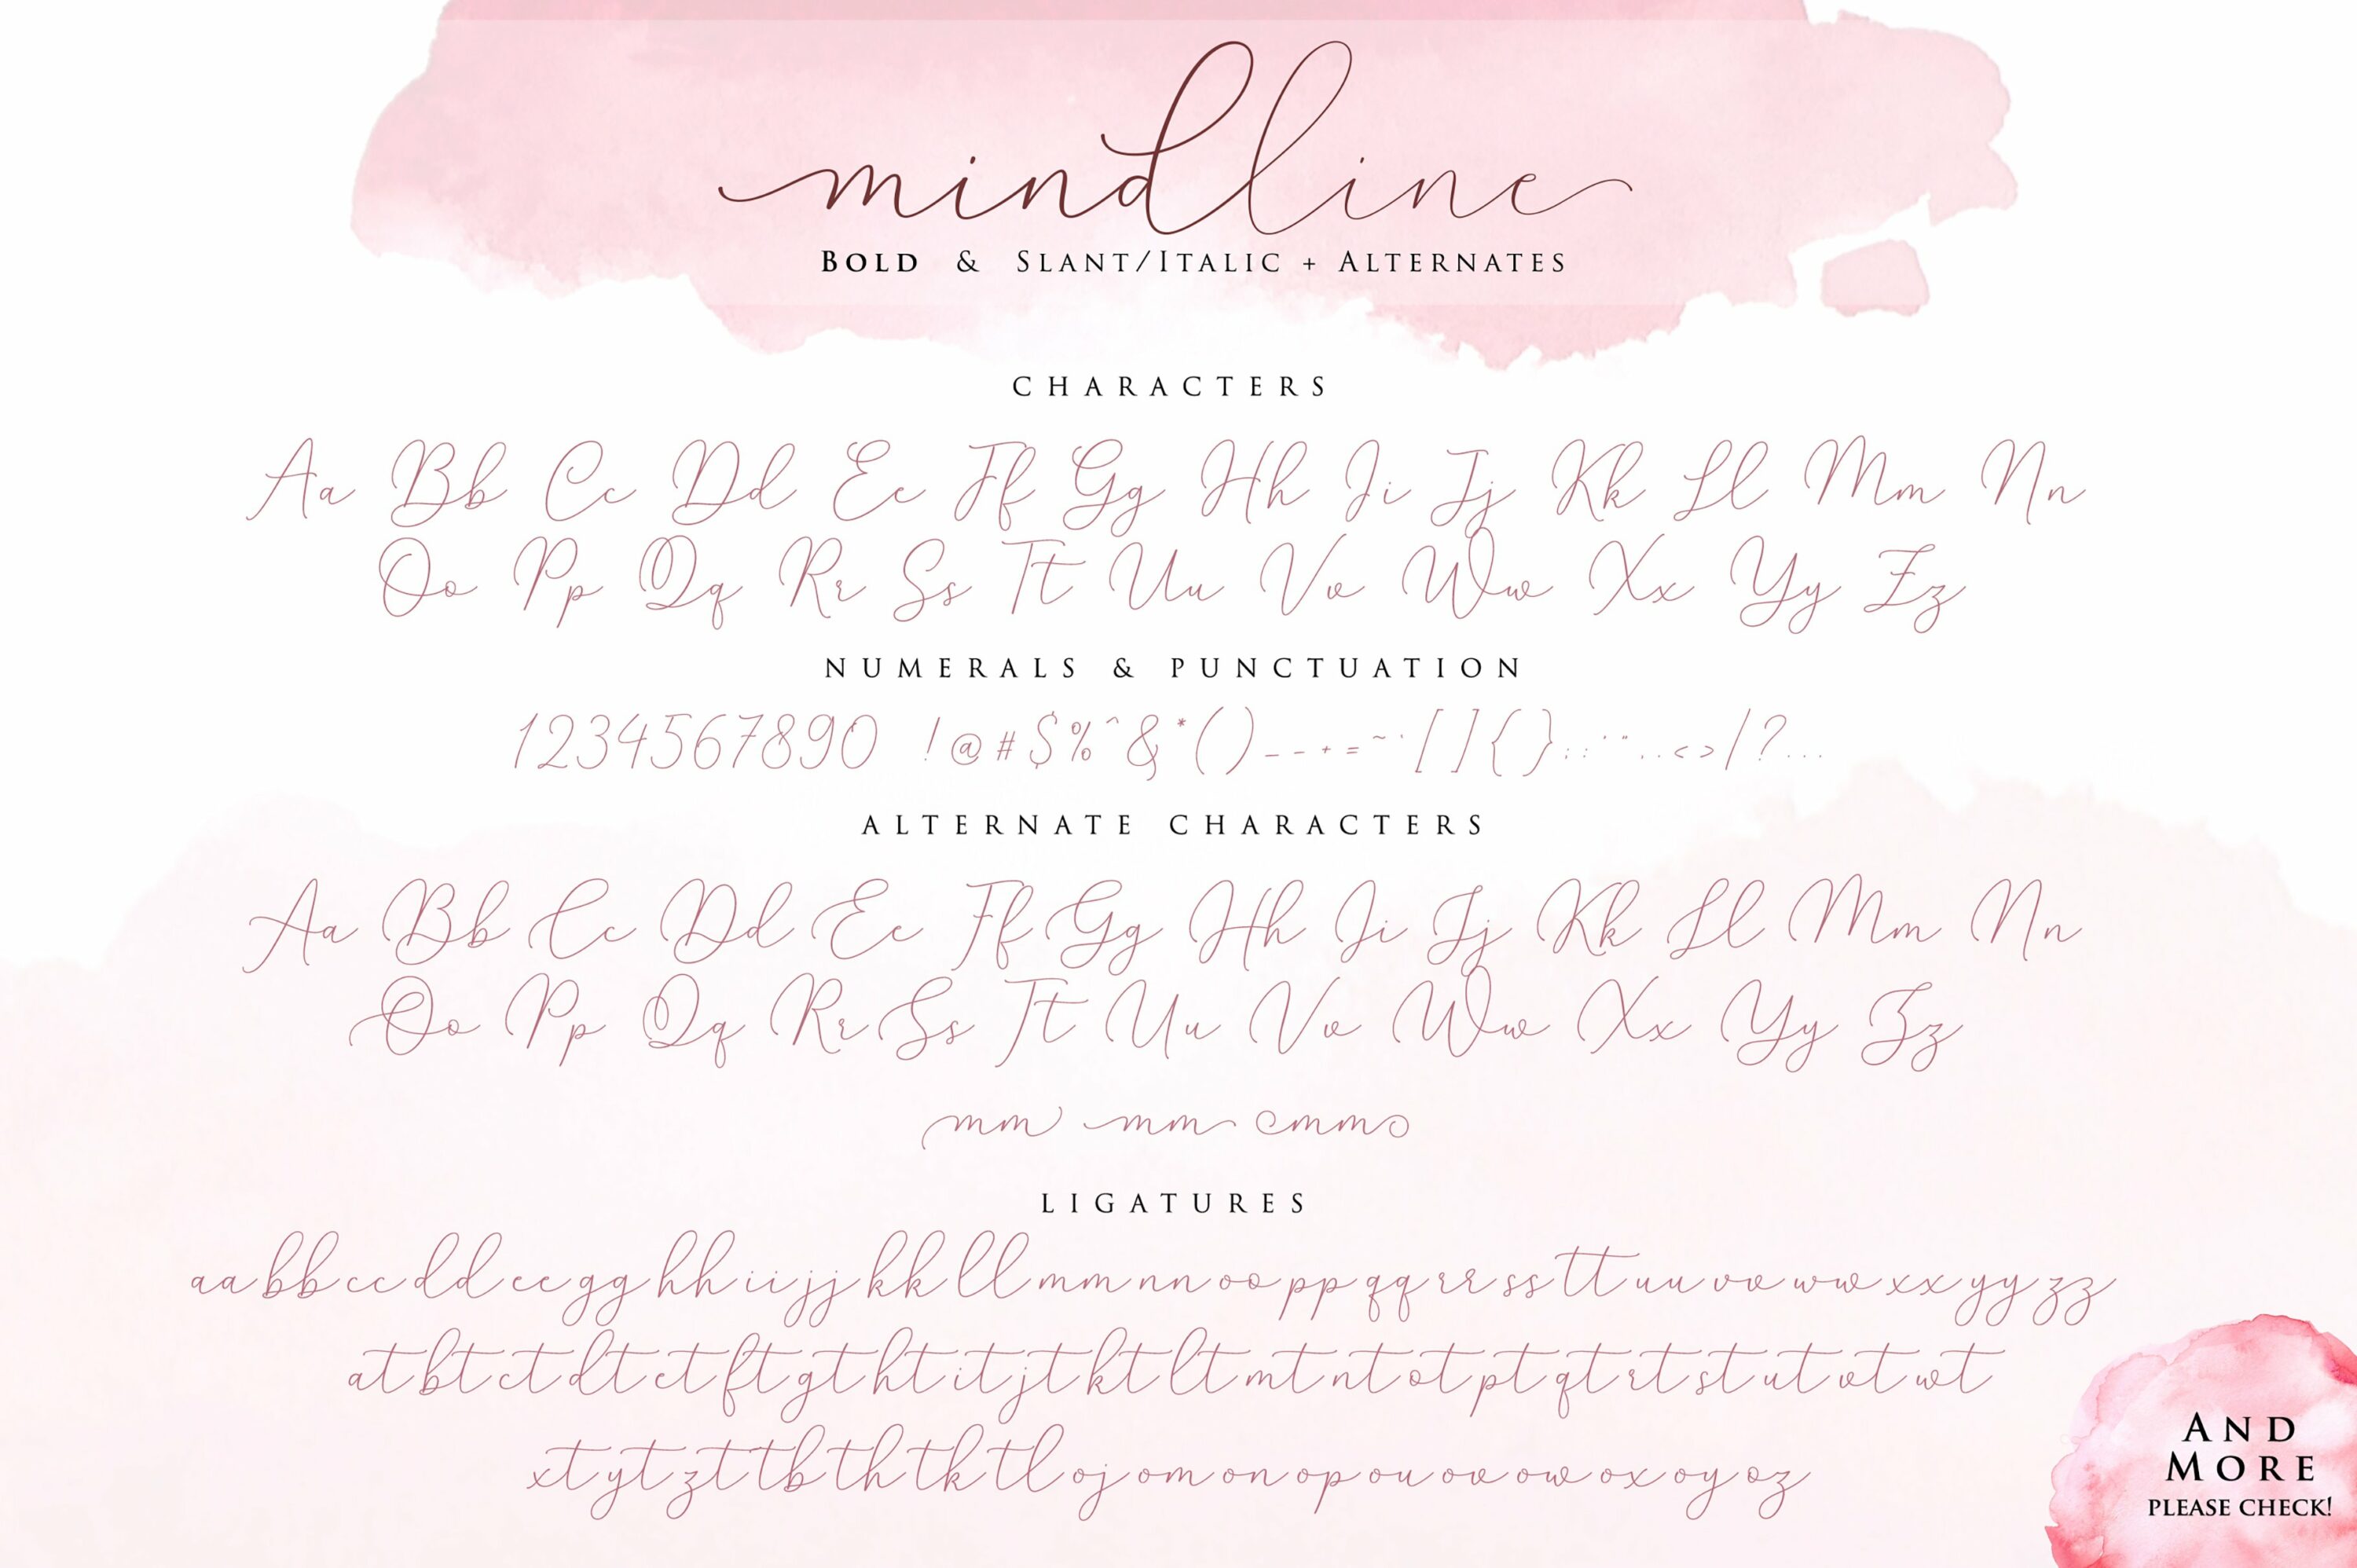 Light pink background with a general view of font.